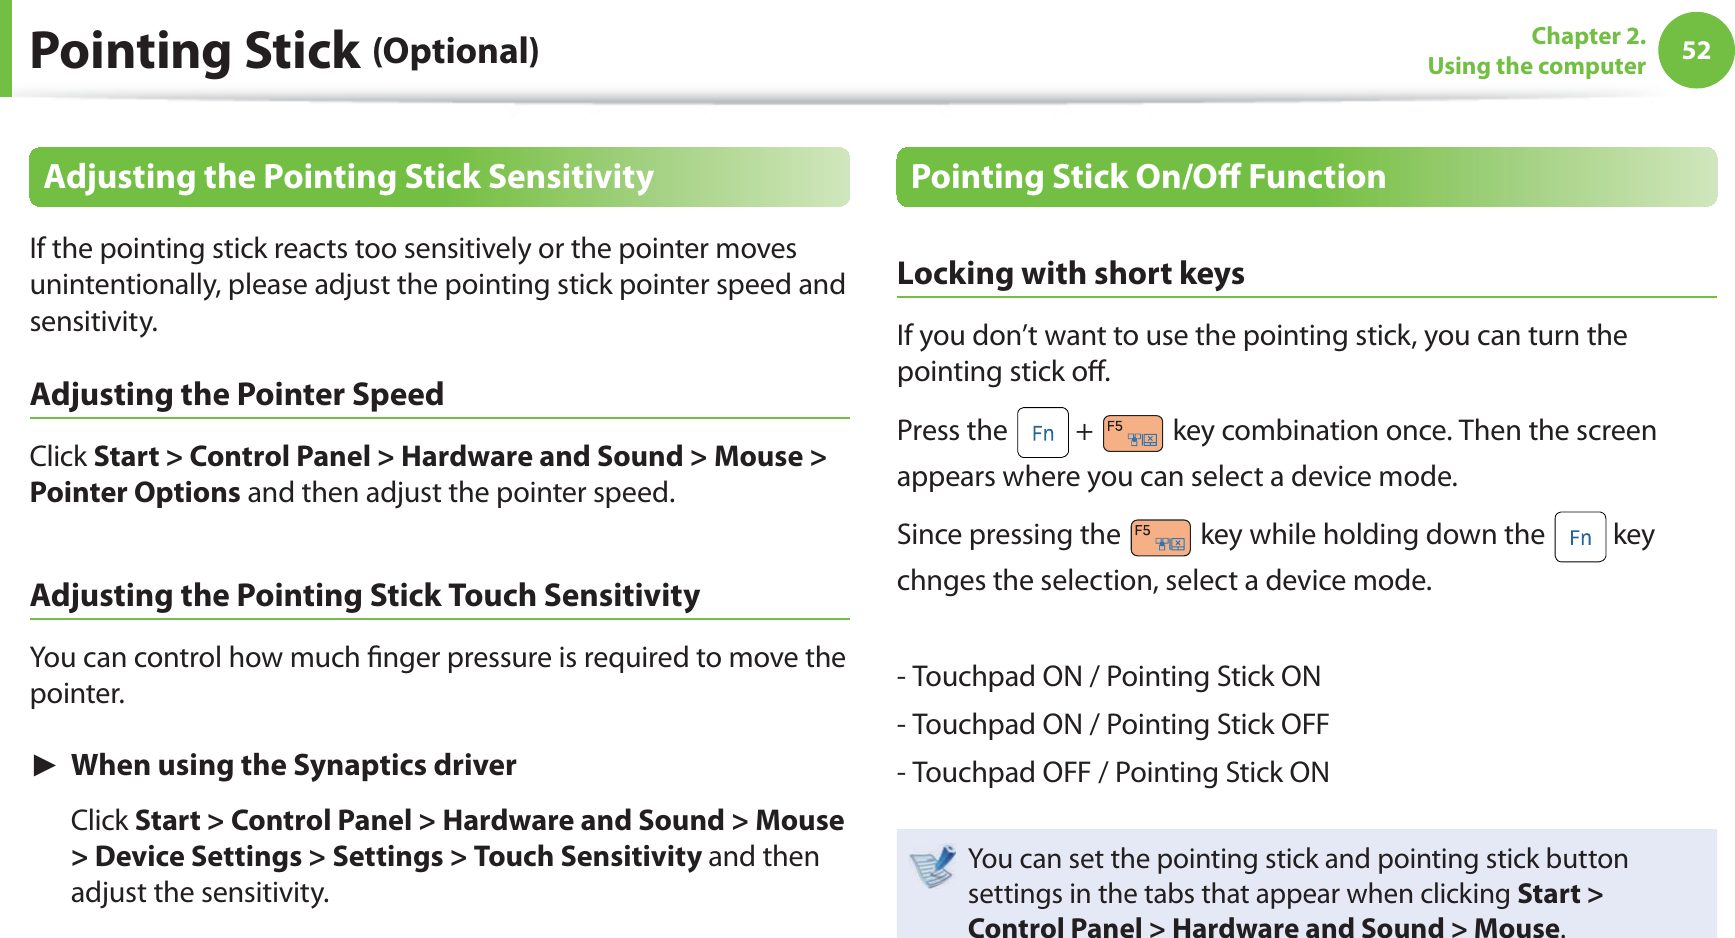 52Chapter 2. Using the computerPointing Stick (Optional)Adjusting the Pointing Stick SensitivityIf the pointing stick reacts too sensitively or the pointer moves unintentionally, please adjust the pointing stick pointer speed and sensitivity.Adjusting the Pointer Speed Click Start &gt; Control Panel &gt; Hardware and Sound &gt; Mouse &gt; Pointer Options and then adjust the pointer speed.Adjusting the Pointing Stick Touch SensitivityYou can control how much ﬁ nger pressure is required to move the pointer.  ► When using the Synaptics driver Click Start &gt; Control Panel &gt; Hardware and Sound &gt; Mouse &gt; Device Settings &gt; Settings &gt; Touch Sensitivity and then adjust the sensitivity.Pointing Stick On/Oﬀ  FunctionLocking with short keys If you don’t want to use the pointing stick, you can turn the pointing stick oﬀ . Press the   +   key combination once. Then the screen appears where you can select a device mode. Since pressing the   key while holding down the   key chnges the selection, select a device mode. - Touchpad ON / Pointing Stick ON- Touchpad ON / Pointing Stick OFF- Touchpad OFF / Pointing Stick ONYou can set the pointing stick and pointing stick button settings in the tabs that appear when clicking Start &gt; Control Panel &gt; Hardware and Sound &gt; Mouse.